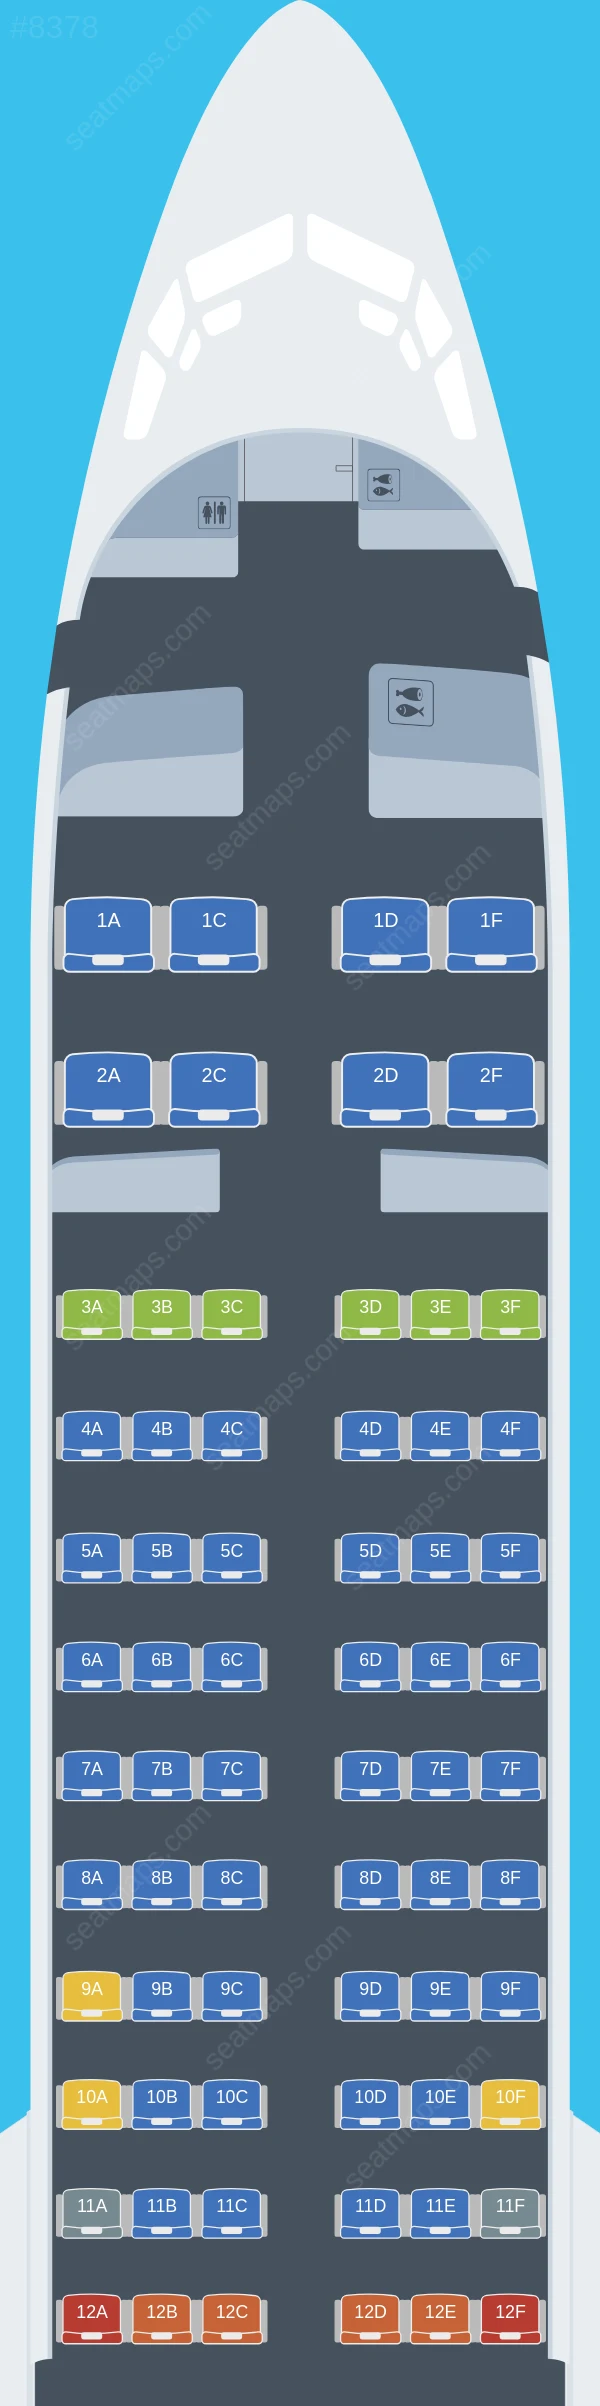 Shandong Airlines Boeing 737 MAX 8 seatmap preview